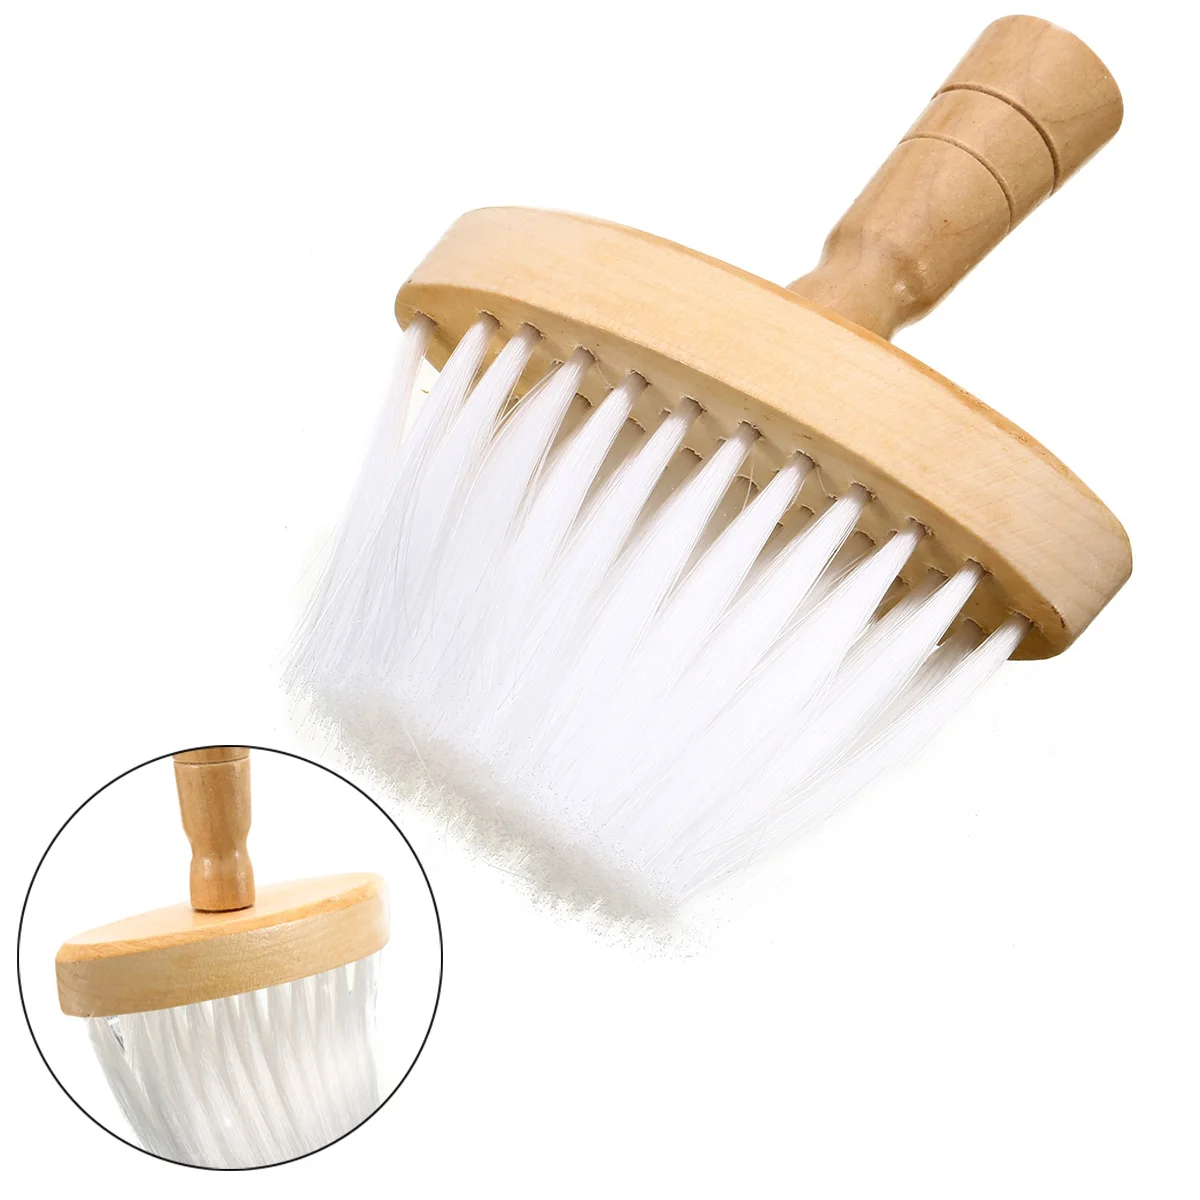 Mayitr 1pc Professional Neck Duster Wooden Handle Barber Wide Neck Duster Brush For Salon Hairdressing Hair Cutting Tool